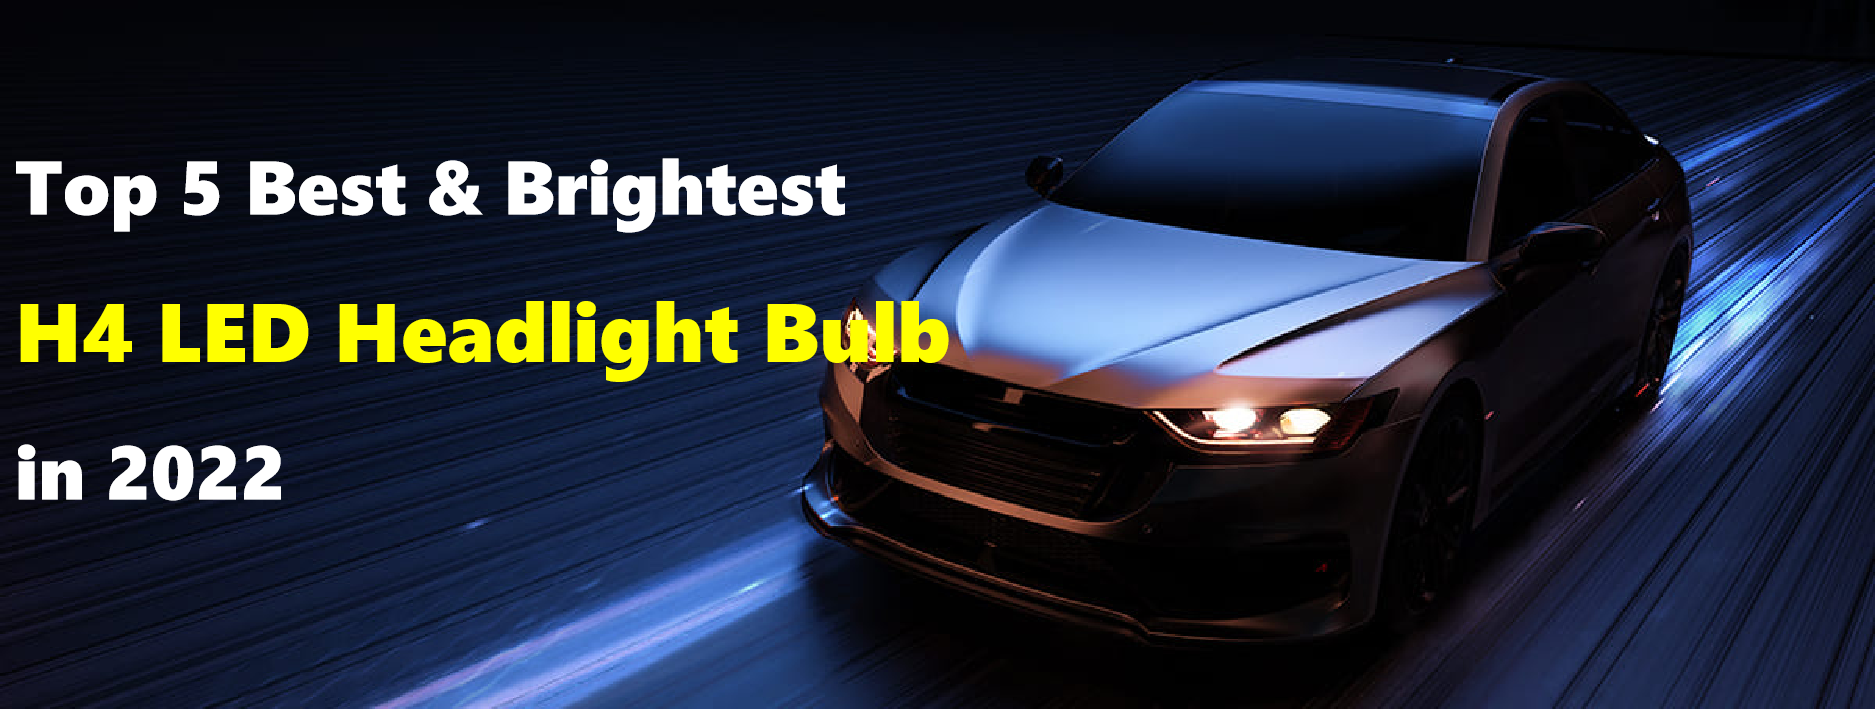 Shop The Best & Brightest H4 LED Headlight Bulbs In 2022